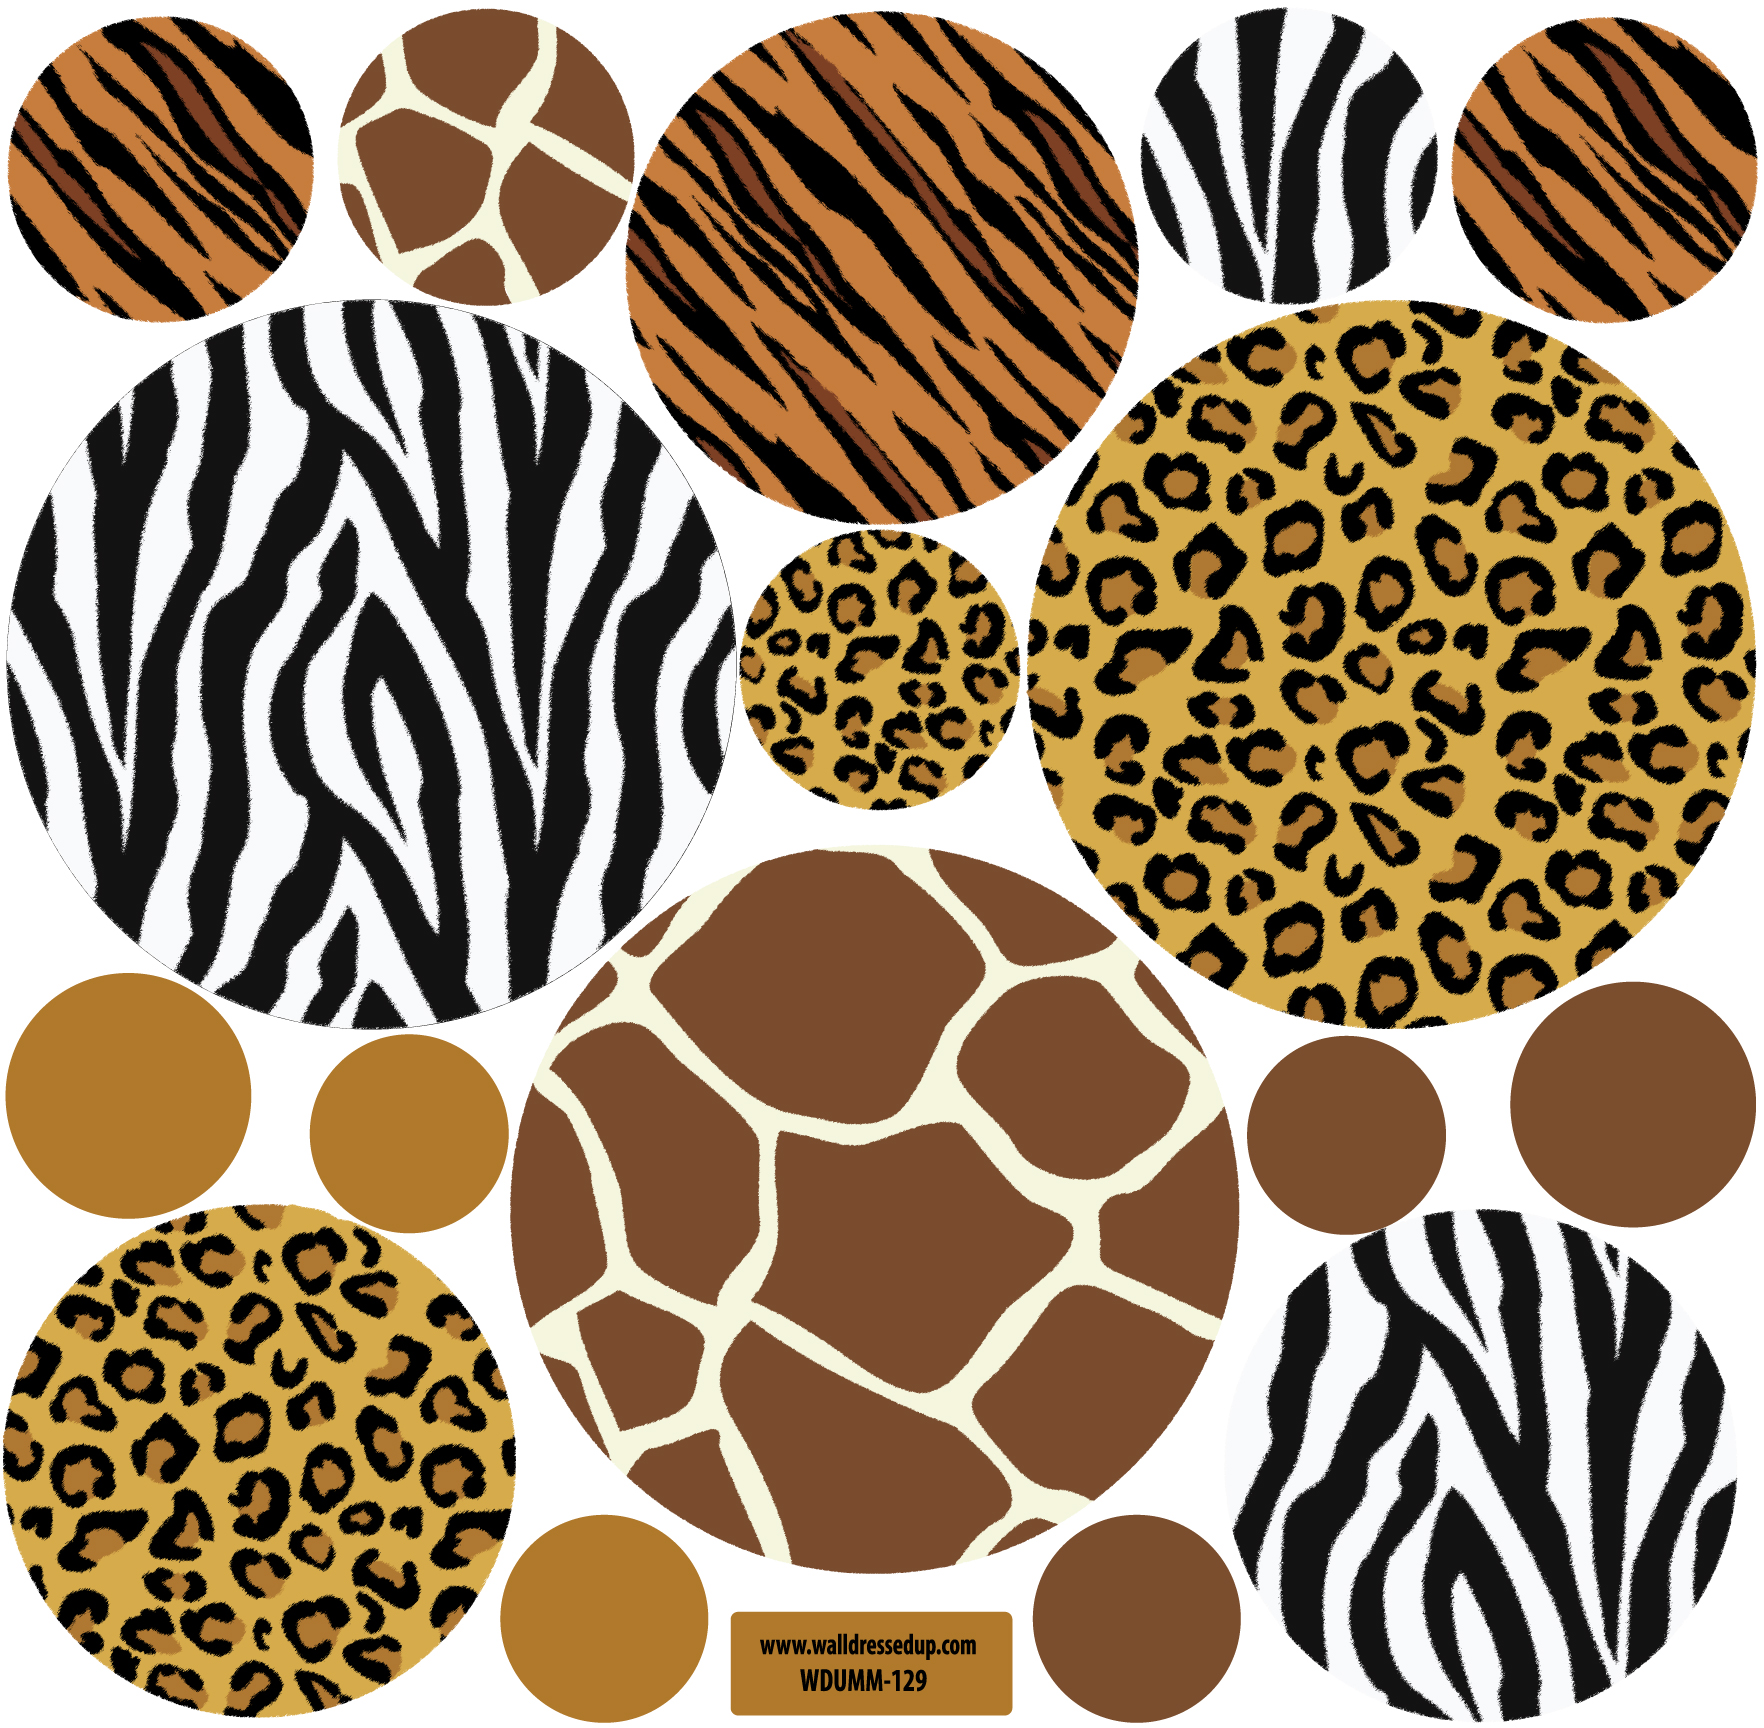 Go Wild With Our Animal Print Wall Decals